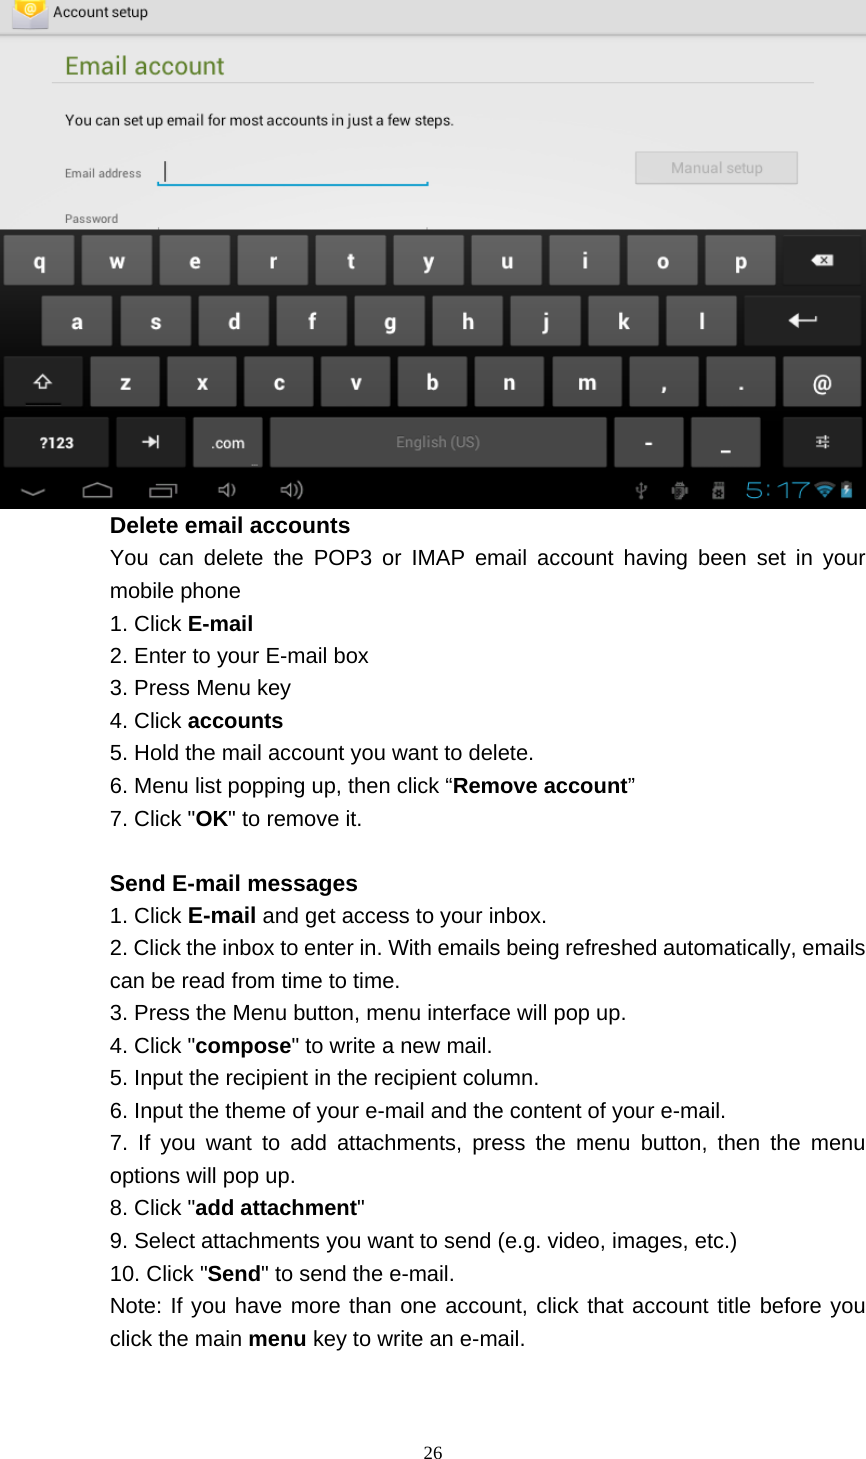    26   Delete email accounts You can delete the POP3 or IMAP email account having been set in your mobile phone 1. Click E-mail 2. Enter to your E-mail box 3. Press Menu key 4. Click accounts 5. Hold the mail account you want to delete. 6. Menu list popping up, then click “Remove account” 7. Click &quot;OK&quot; to remove it.  Send E-mail messages 1. Click E-mail and get access to your inbox. 2. Click the inbox to enter in. With emails being refreshed automatically, emails can be read from time to time. 3. Press the Menu button, menu interface will pop up. 4. Click &quot;compose&quot; to write a new mail. 5. Input the recipient in the recipient column. 6. Input the theme of your e-mail and the content of your e-mail. 7. If you want to add attachments, press the menu button, then the menu options will pop up. 8. Click &quot;add attachment&quot; 9. Select attachments you want to send (e.g. video, images, etc.) 10. Click &quot;Send&quot; to send the e-mail. Note: If you have more than one account, click that account title before you click the main menu key to write an e-mail. 